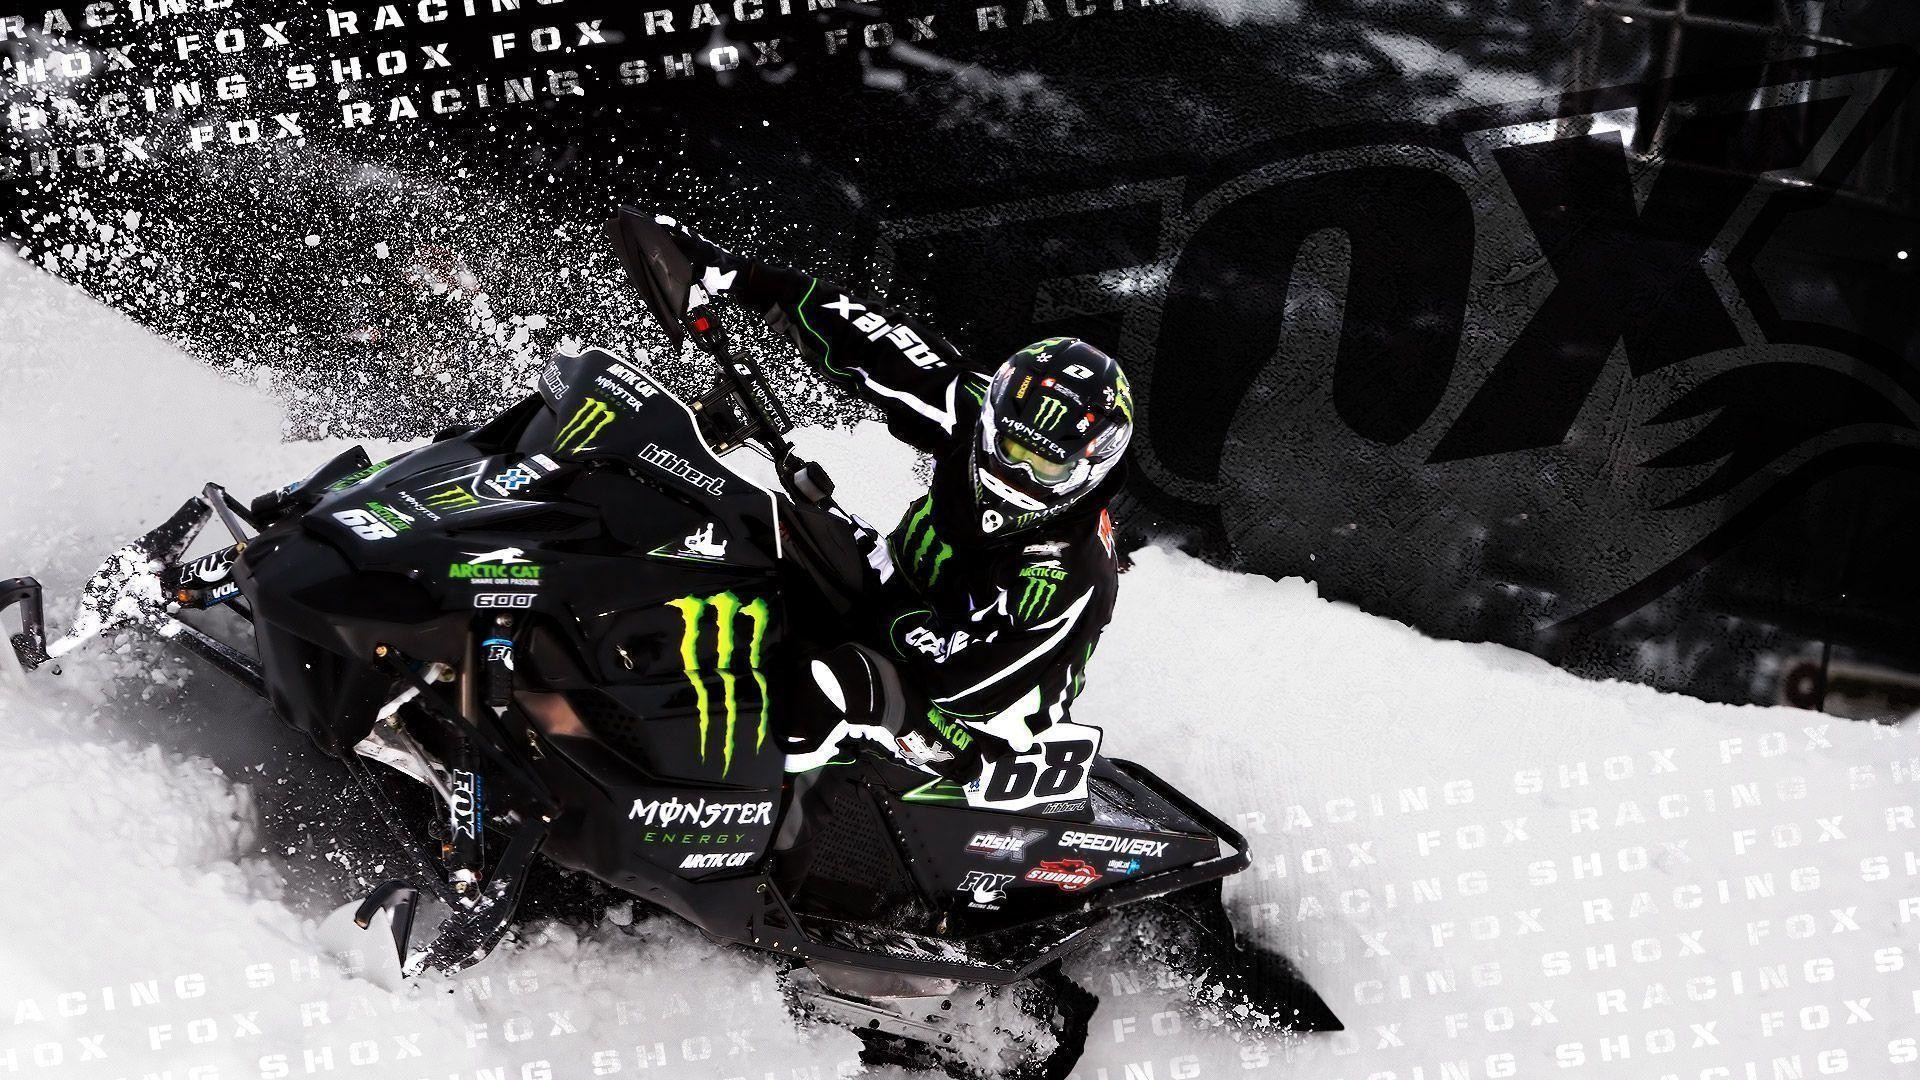 1920x1080 Wallpapers For > Fox Racing Backgrounds For Phones